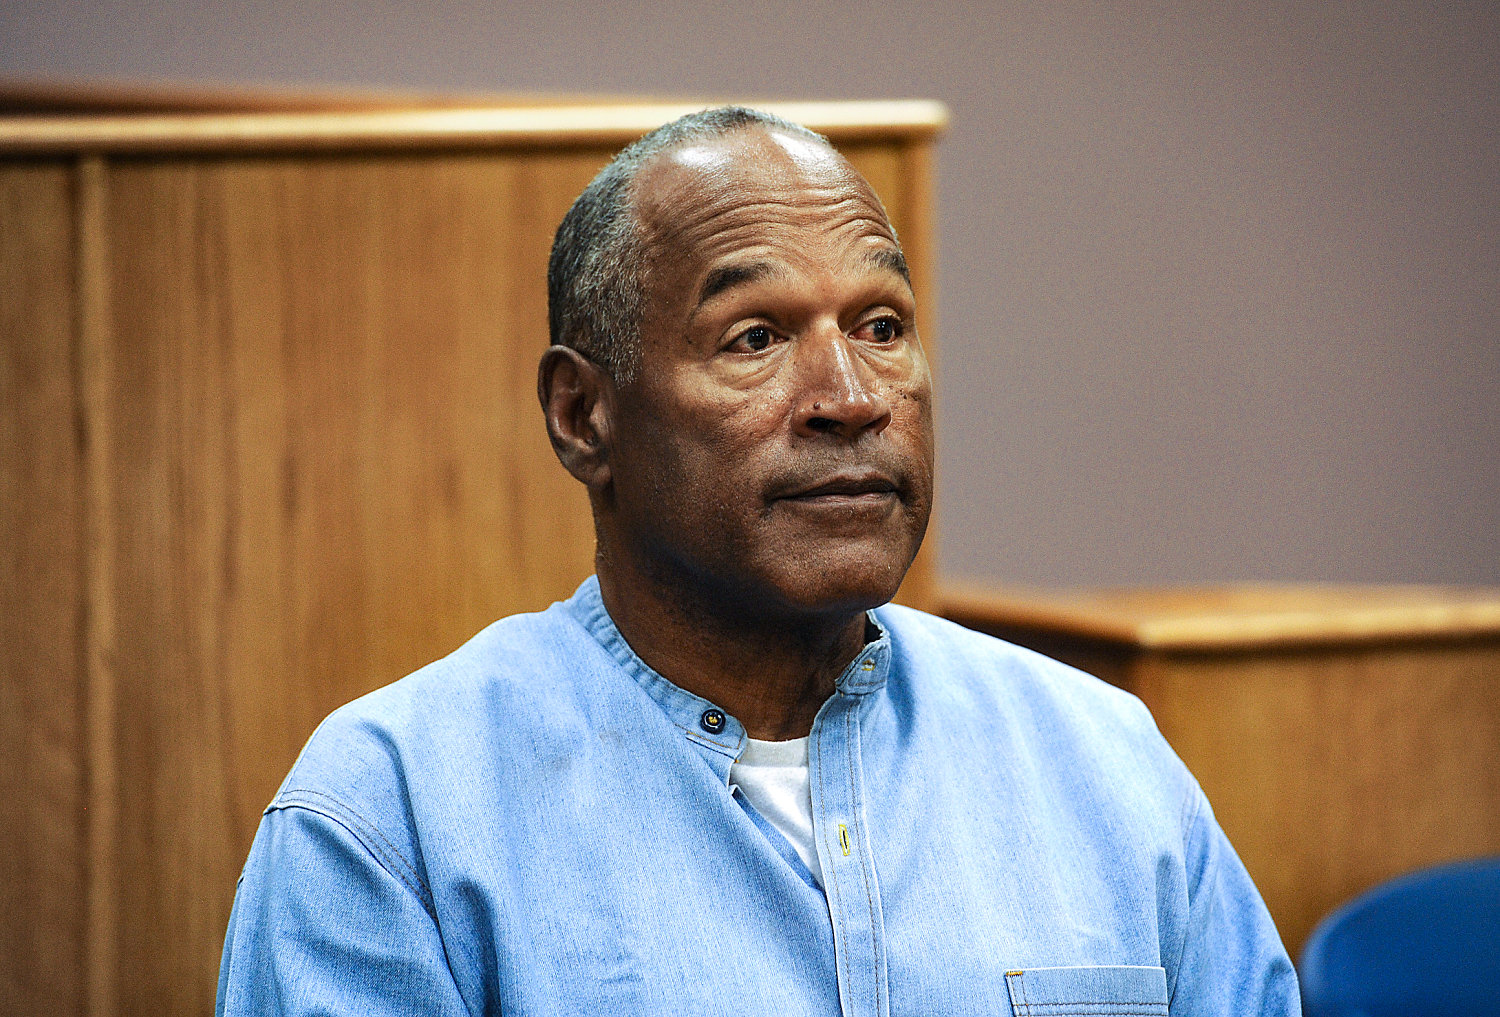 O.J. Simpson will be cremated, brain won't be donated for CTE research, lawyer says